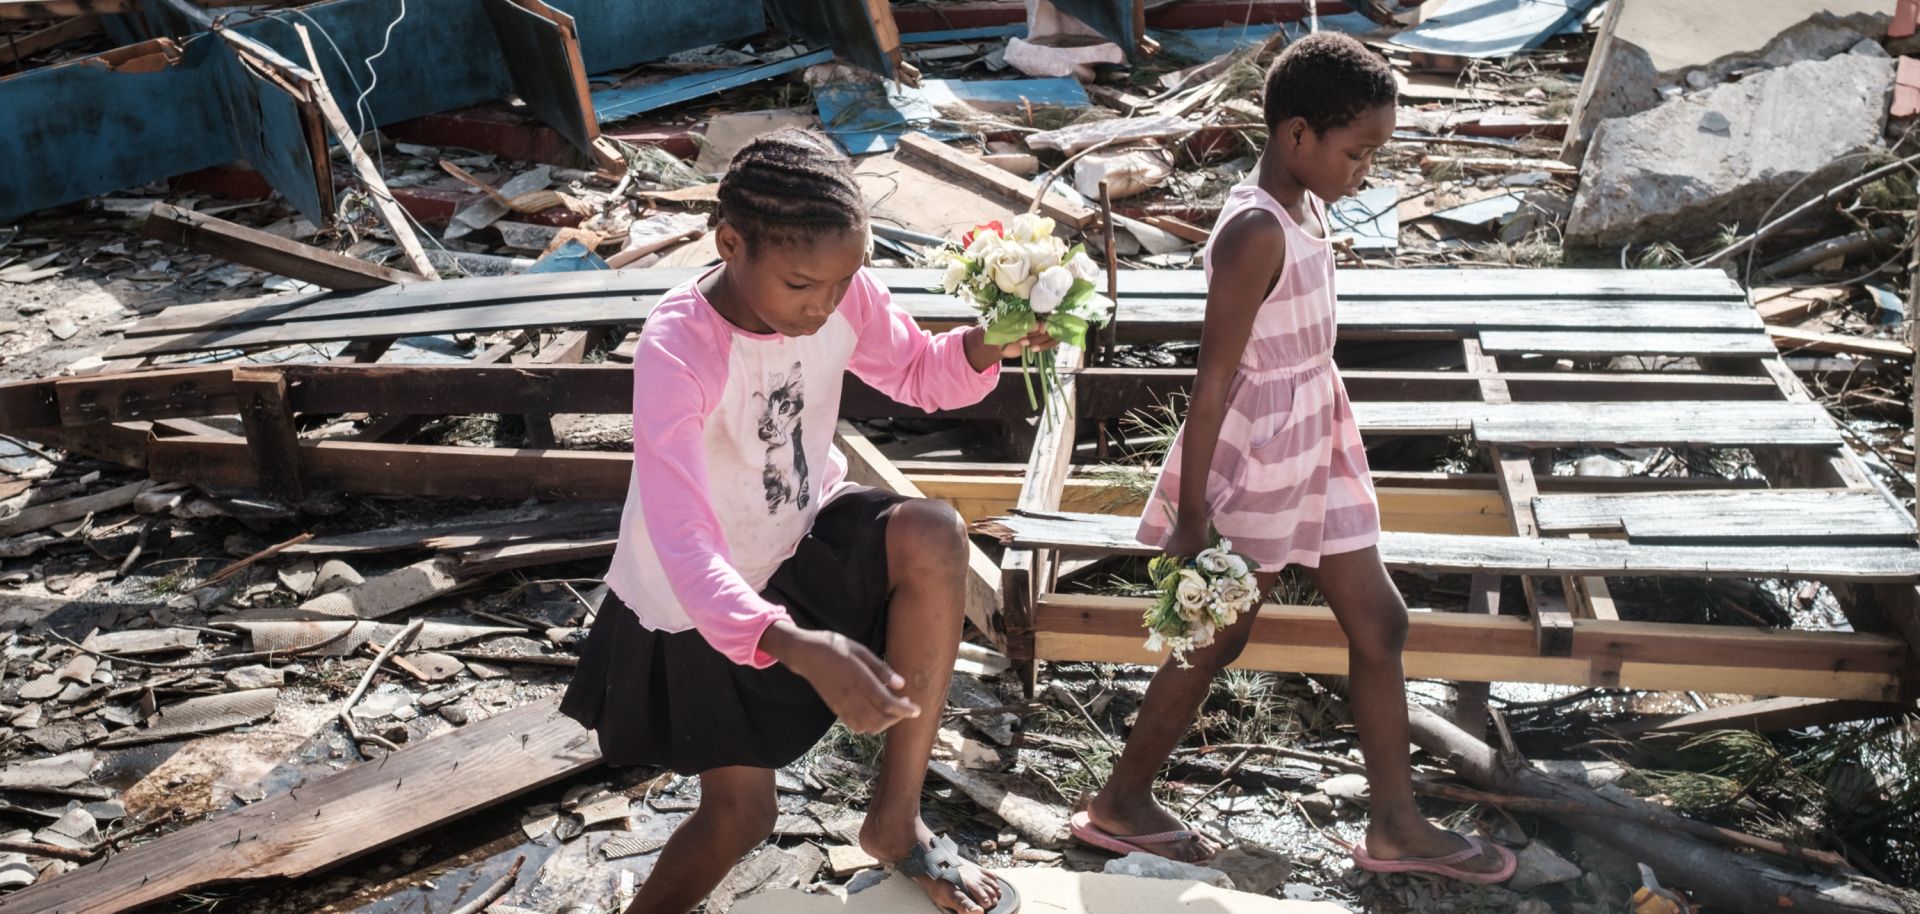 Girls collect artificial flowers from the rubble of a building destroyed by Cyclone Idai at Sacred Heart Catholic Church in Beira, Mozambique, on March 24, 2019.